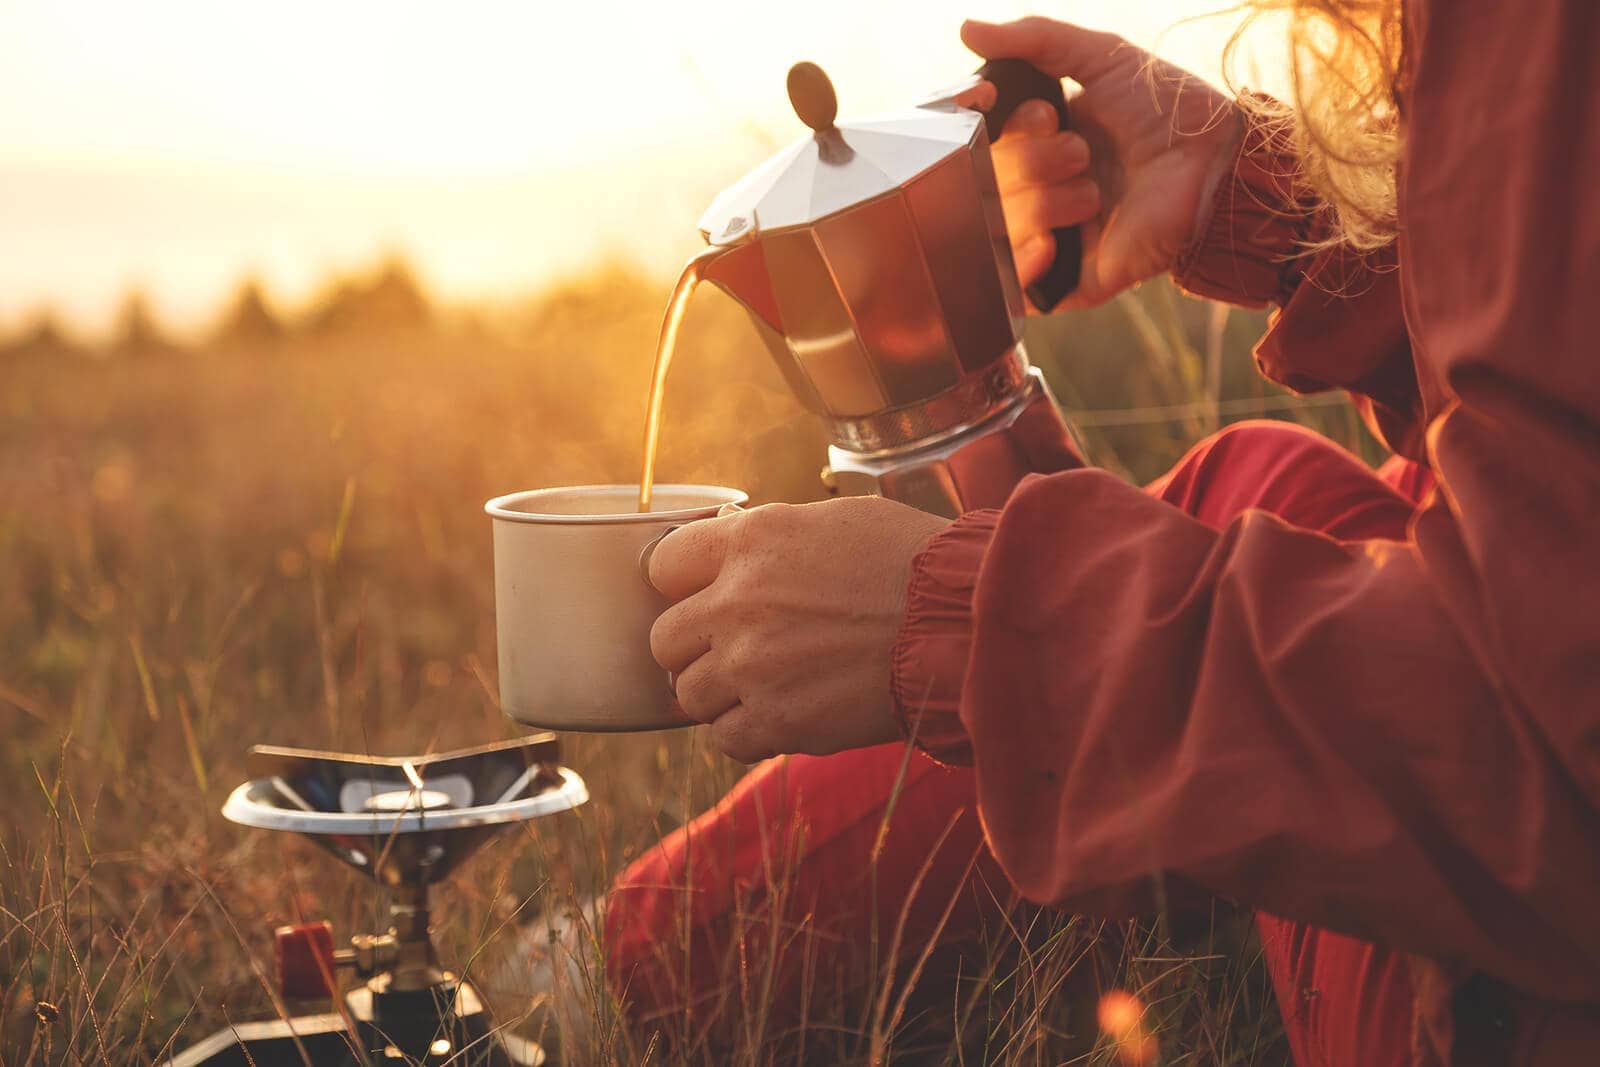 Our Guide On: How To Make Coffee While Camping